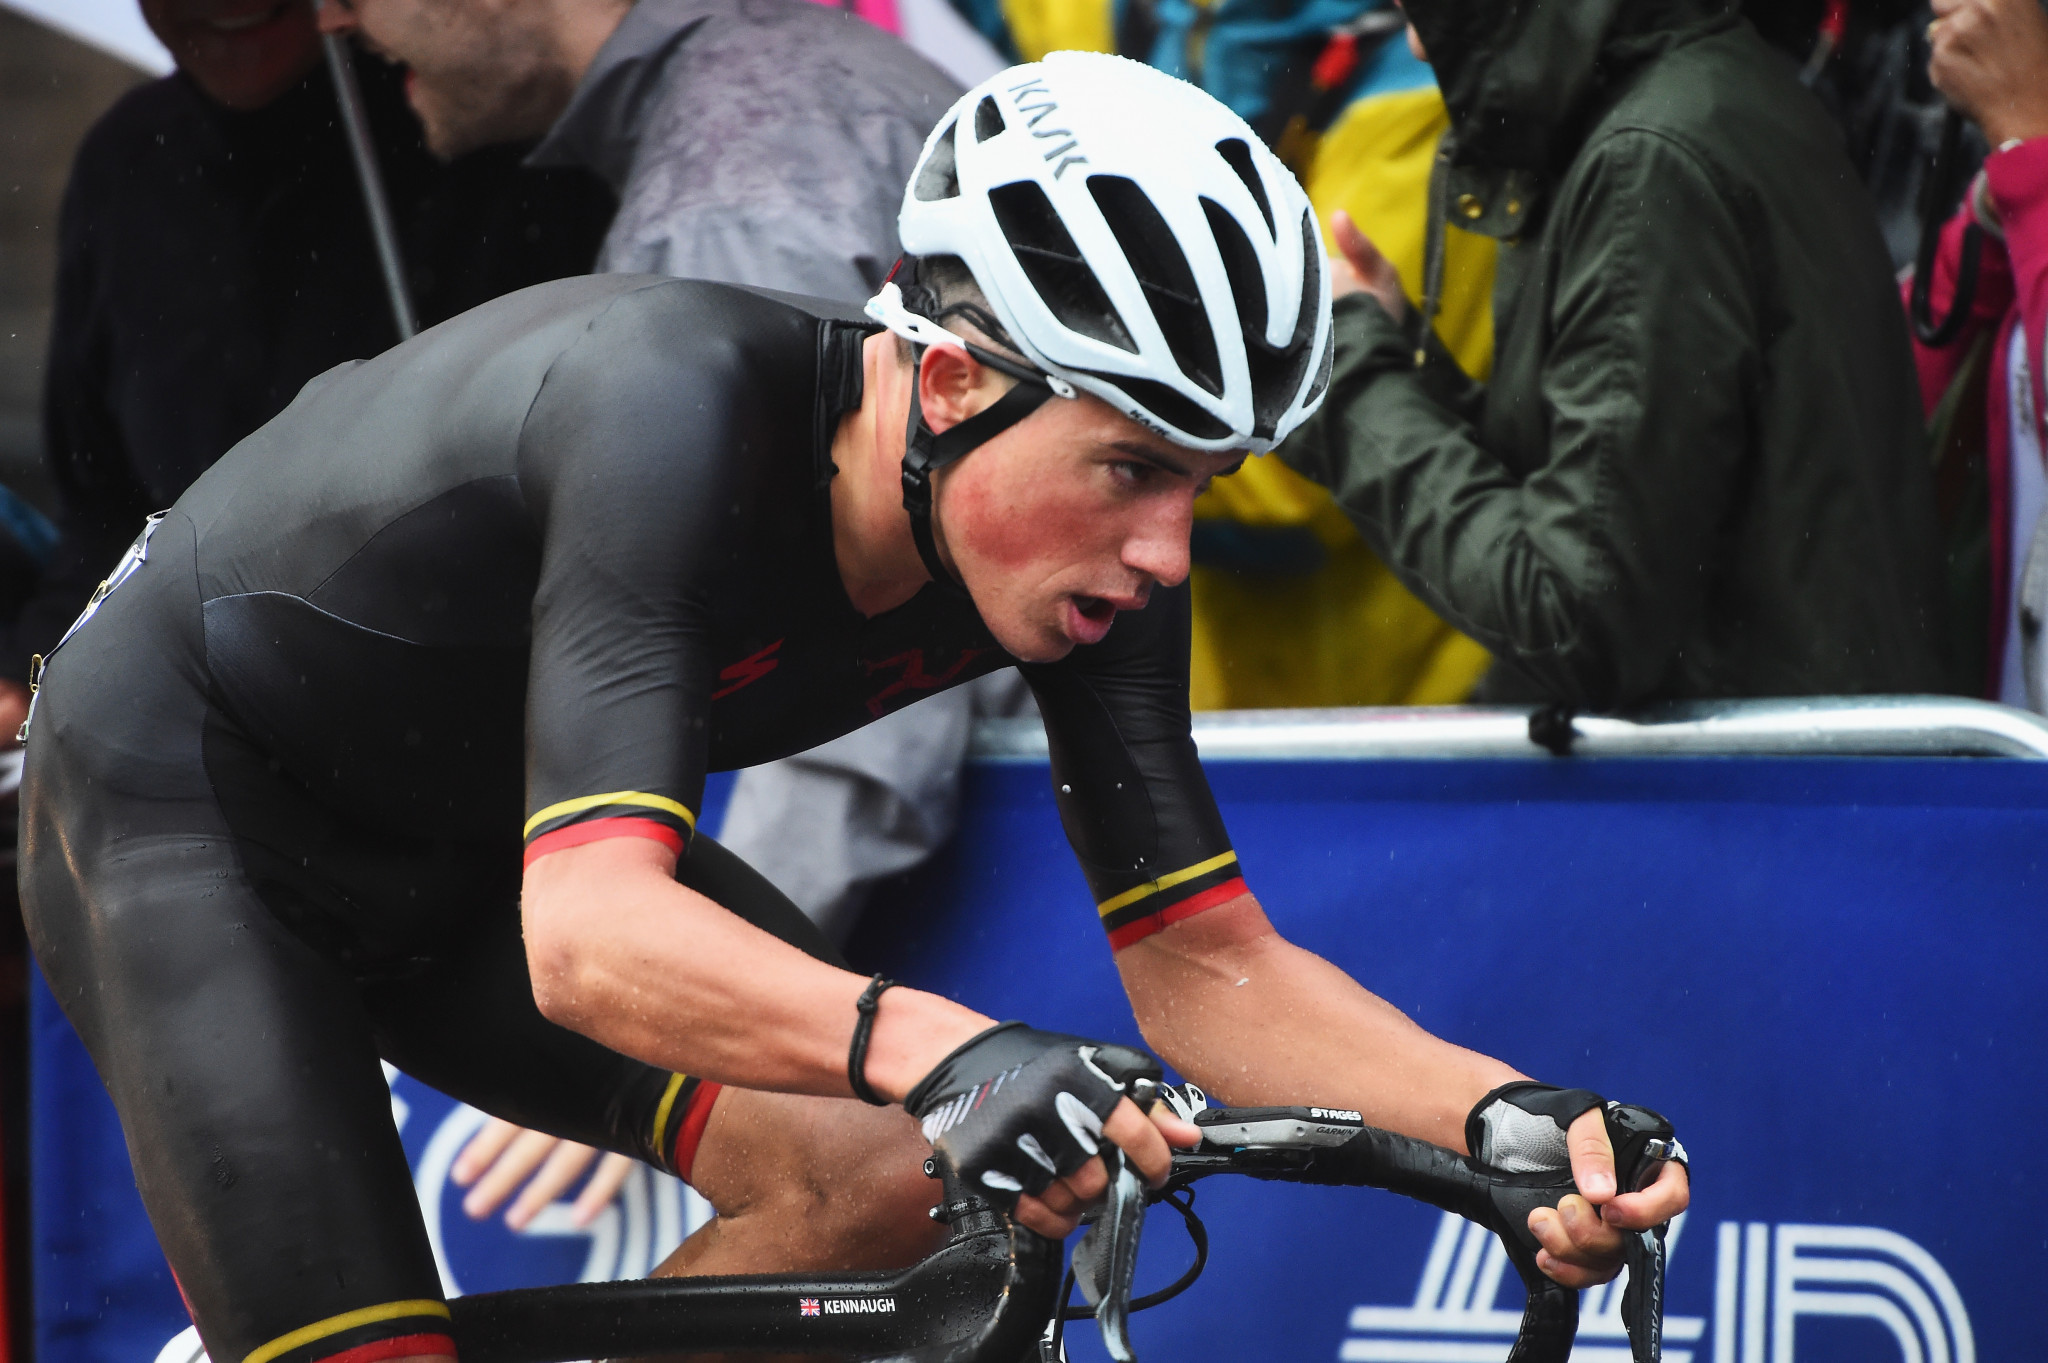 Peter Kennaugh won a silver medal for the Isle of Man at Glasgow 2014 ©Getty Images